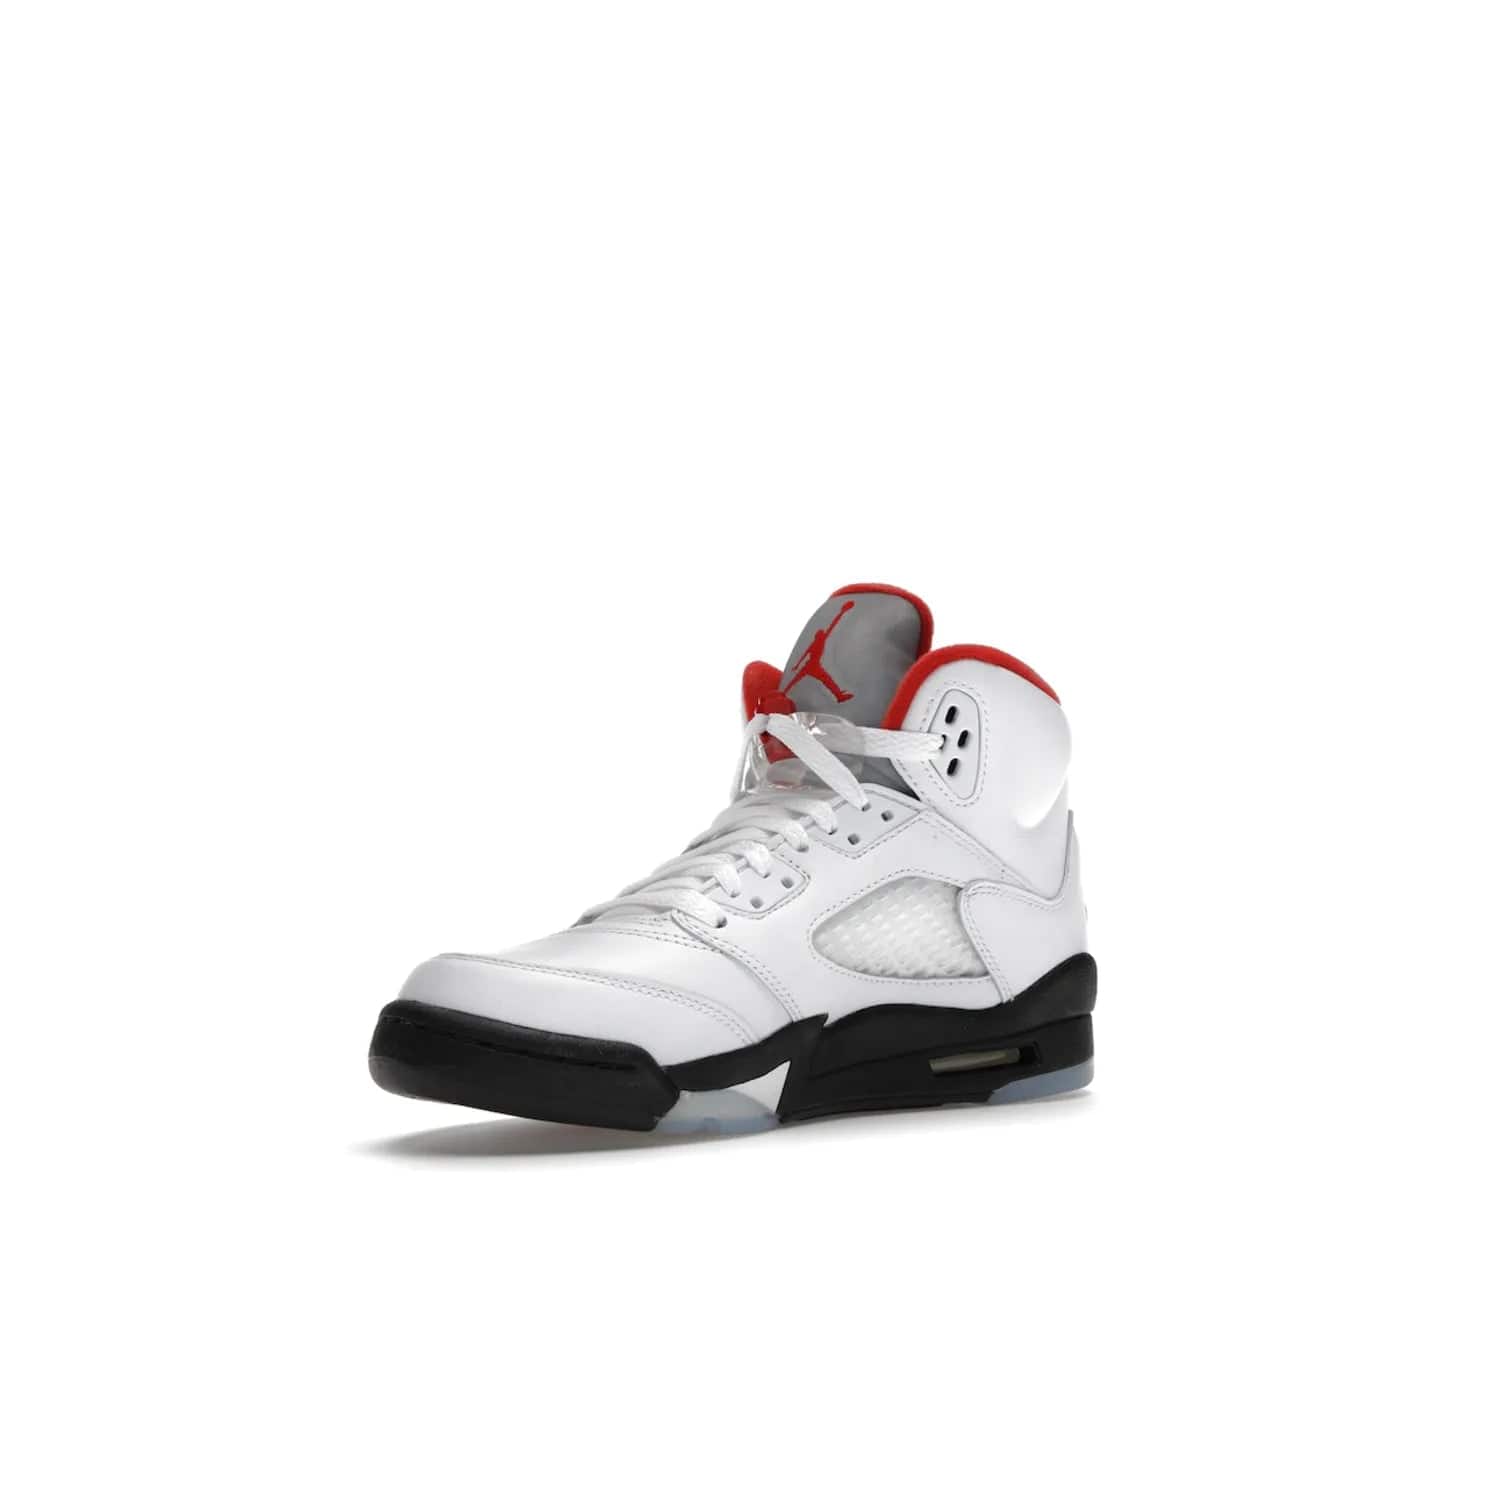 Jordan 5 Retro Fire Red Silver Tongue (2020) (GS) - Image 15 - Only at www.BallersClubKickz.com - A stylish option for any grade schooler. The Air Jordan 5 Retro Fire Red Silver Tongue 2020 GS features a combination of four hues, premium white leather, a clear mesh mid-upper and a reflective silver tongue. An icy translucent blue outsole completes the look. Available on May 2, $150.